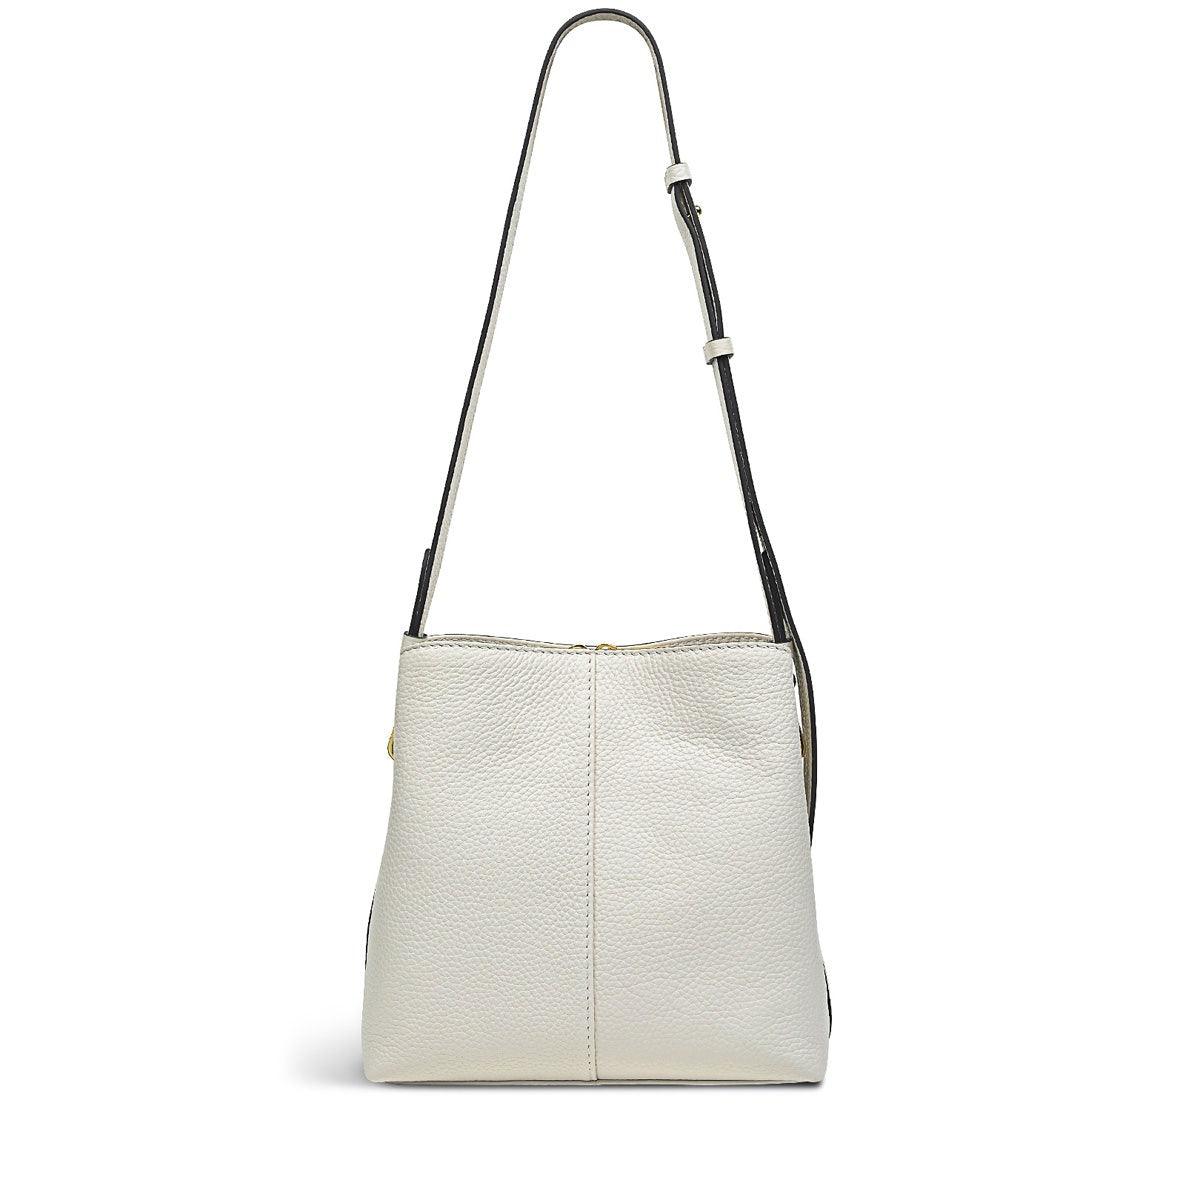 DUKES PLACE - Medium Compartment Cross Body - RUTHERFORD & Co